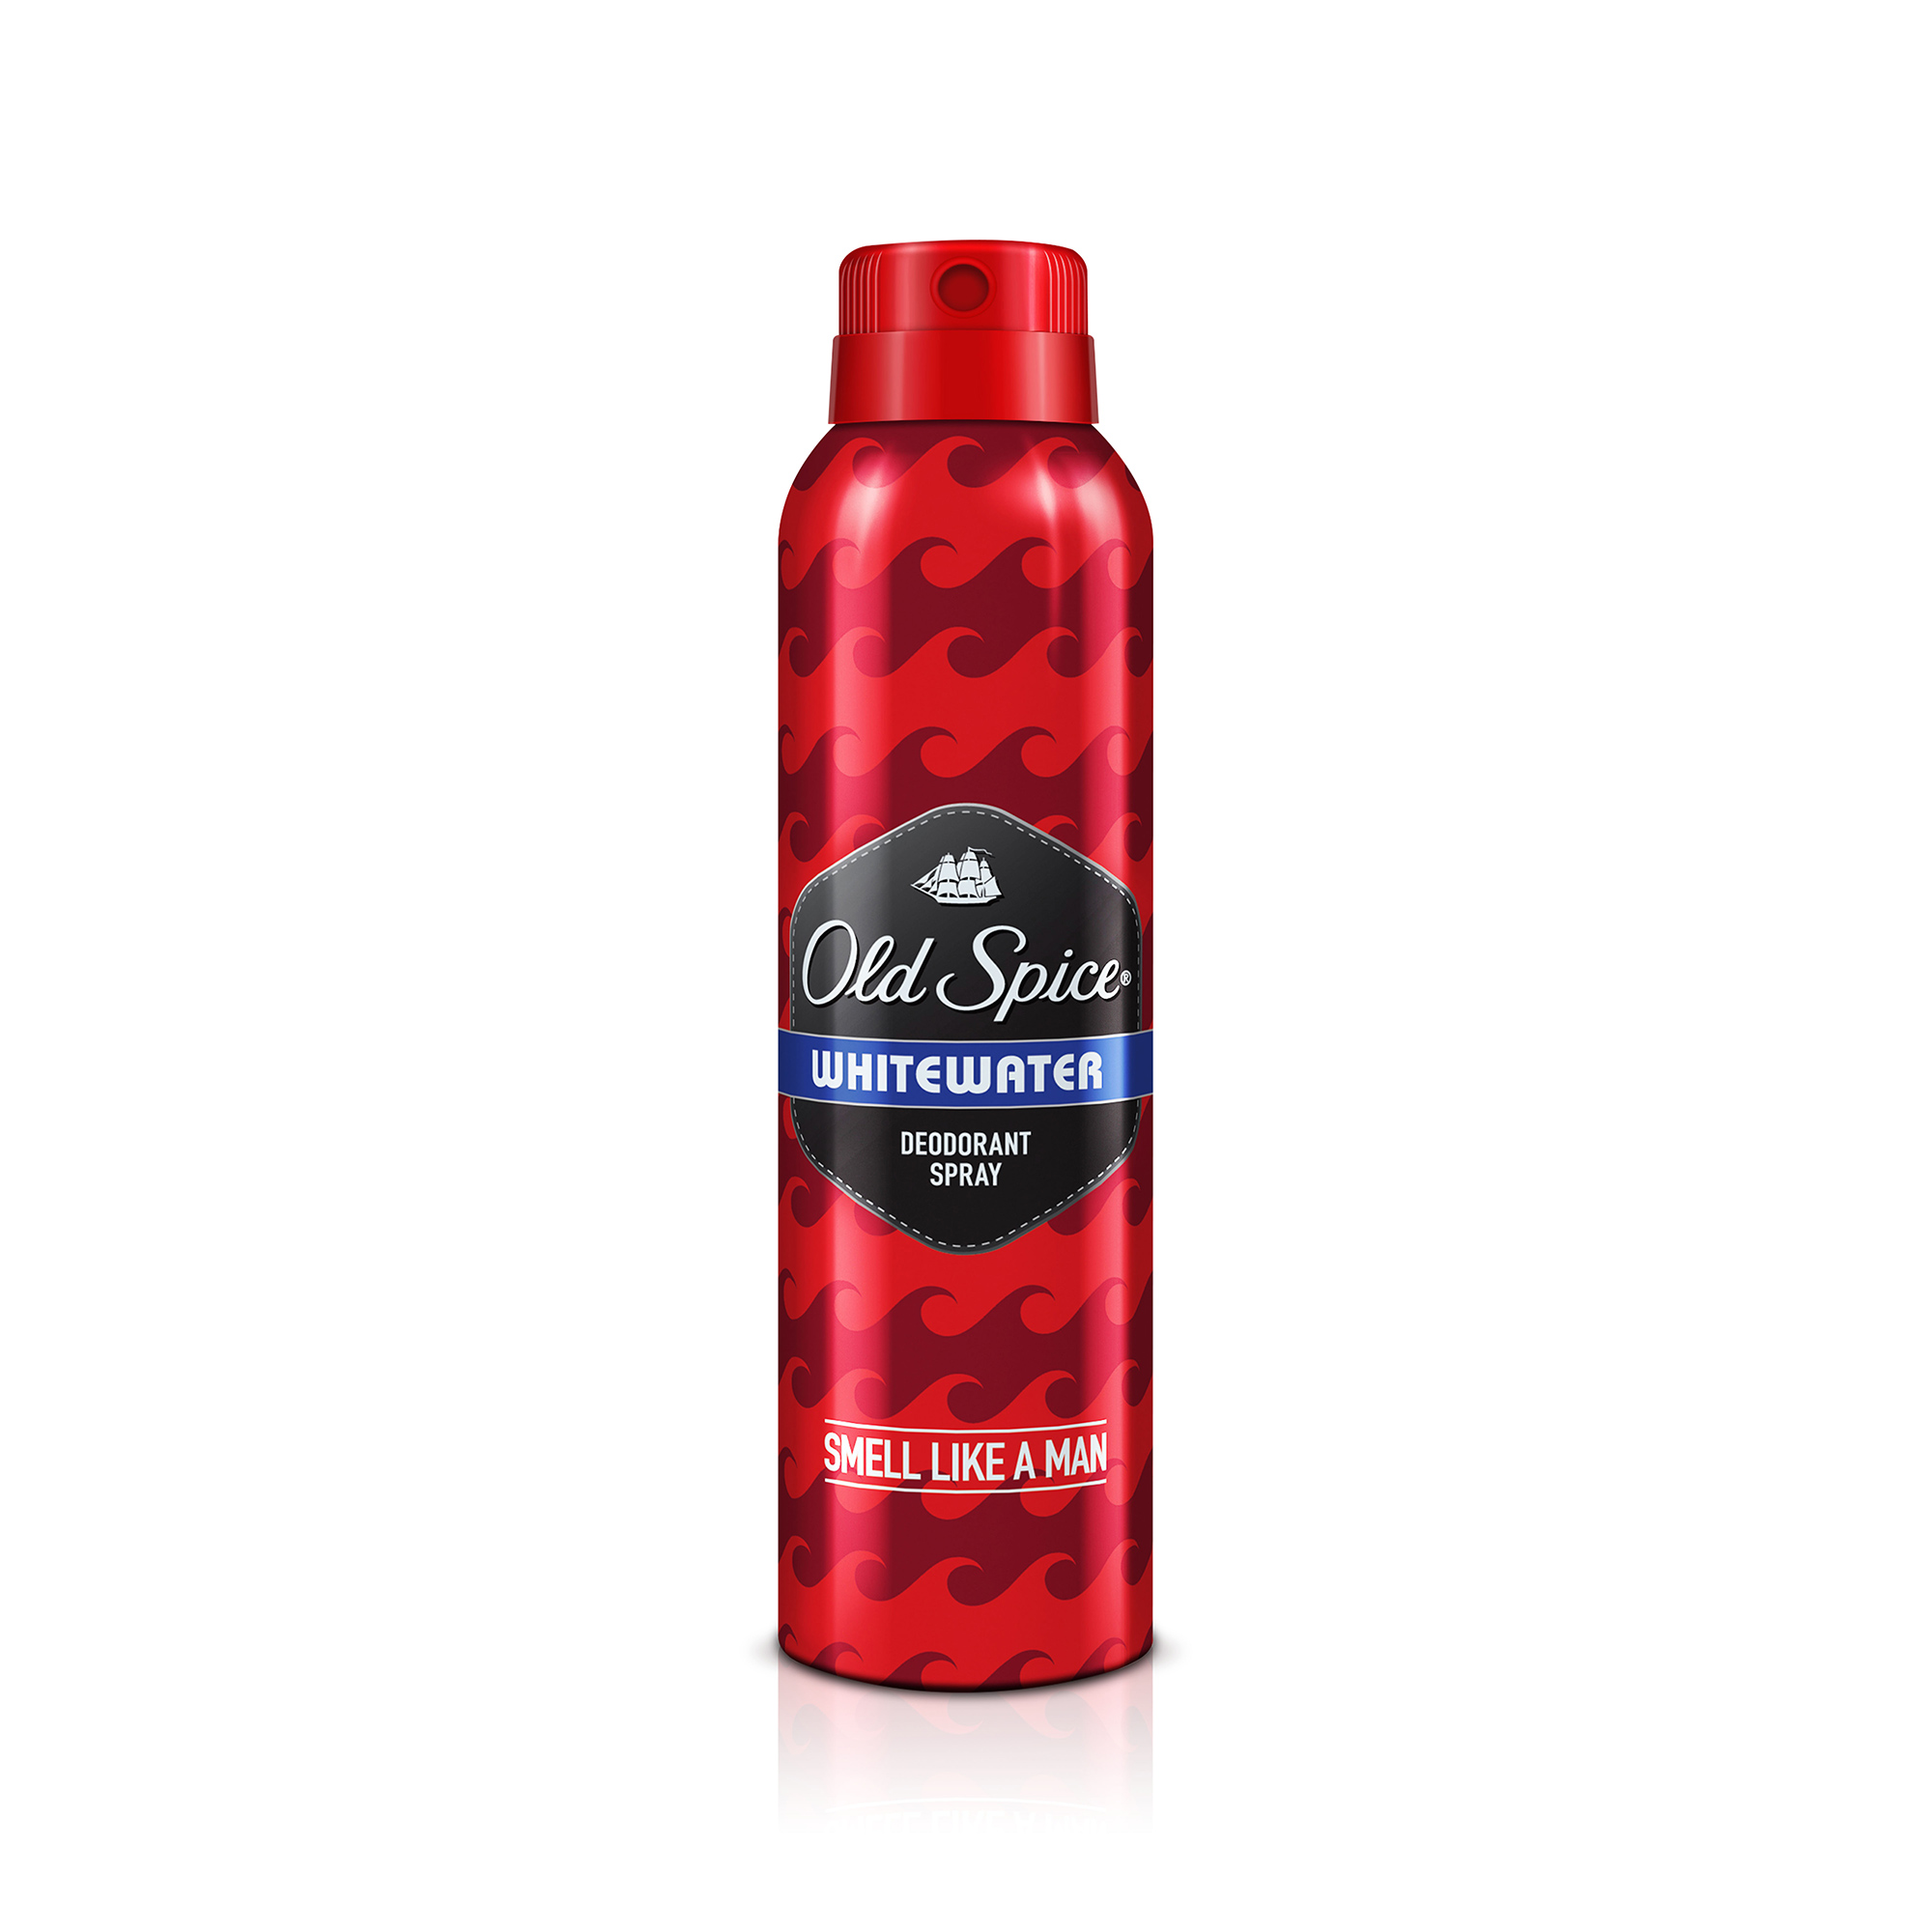 Old Spice Original Perfume Personal Grooming Congratulations Gift Set for Men